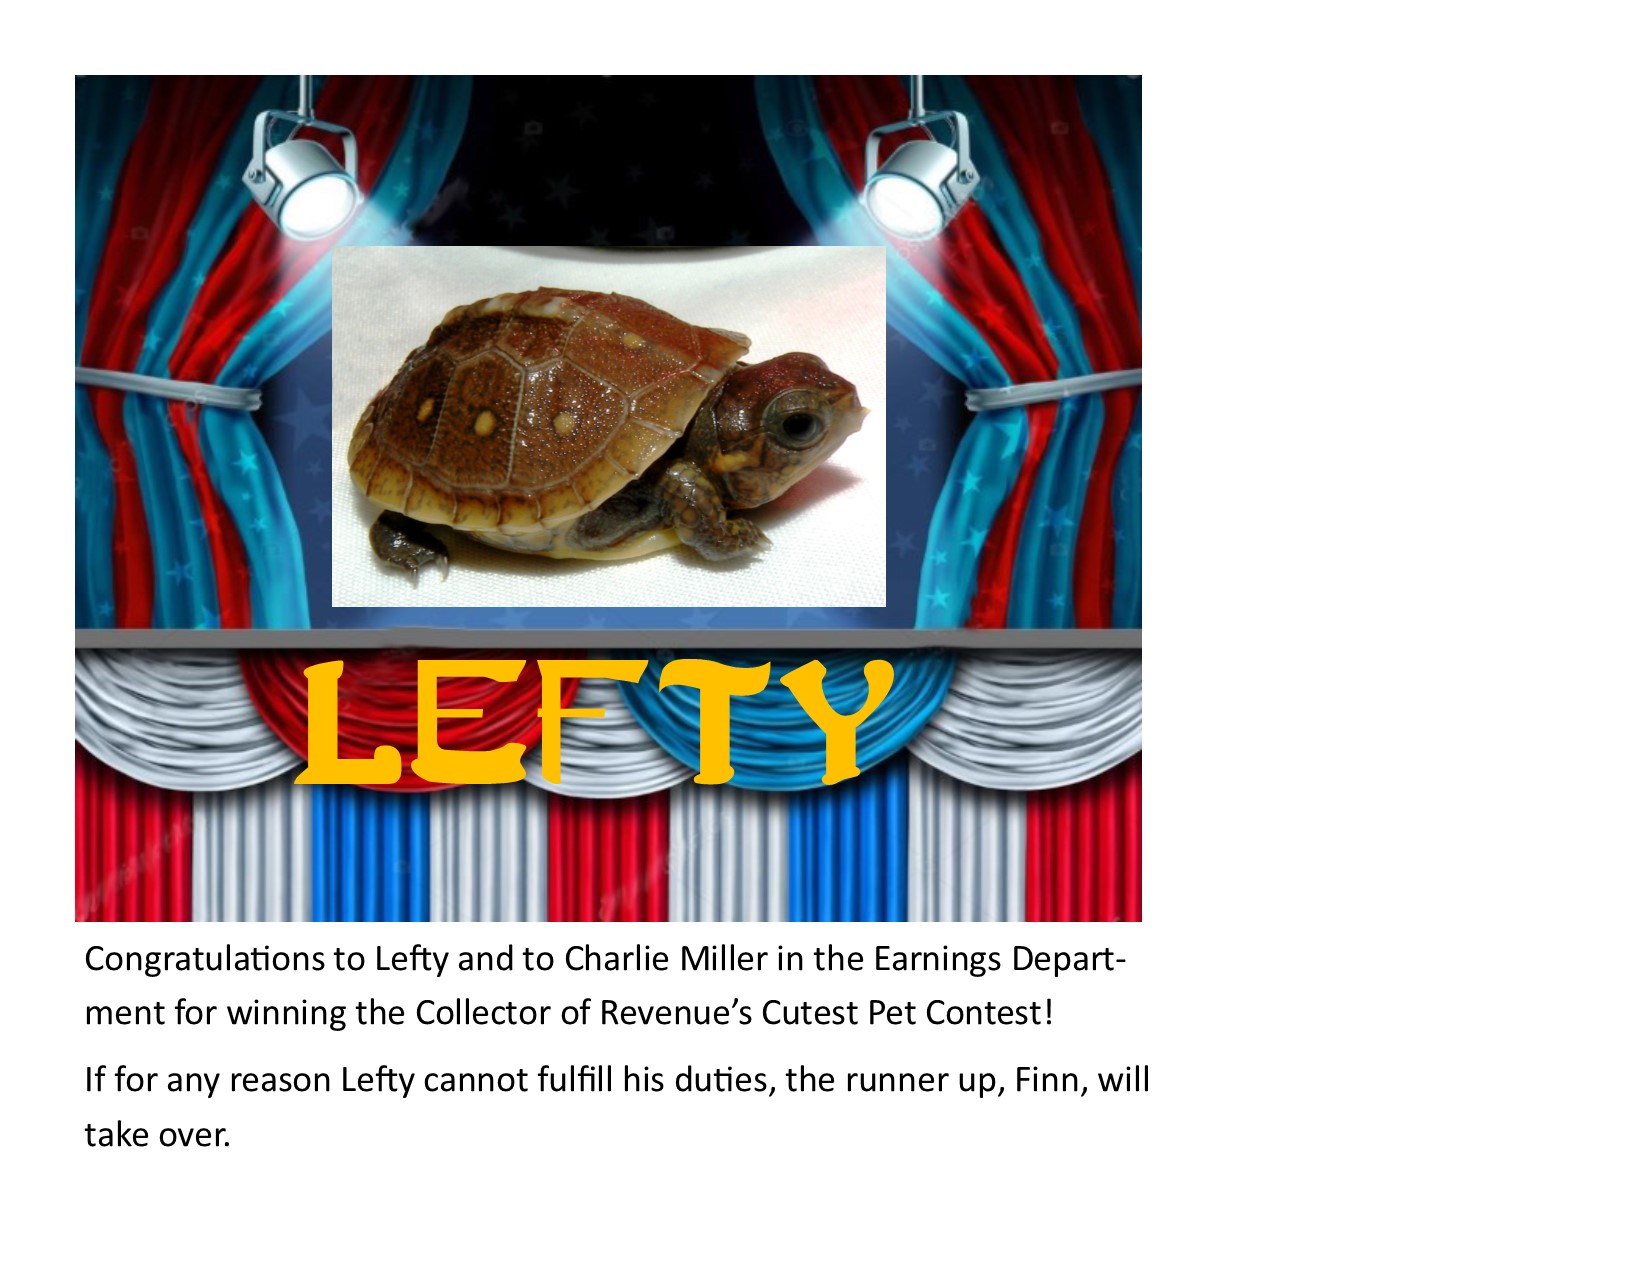 Lefty the Turtle